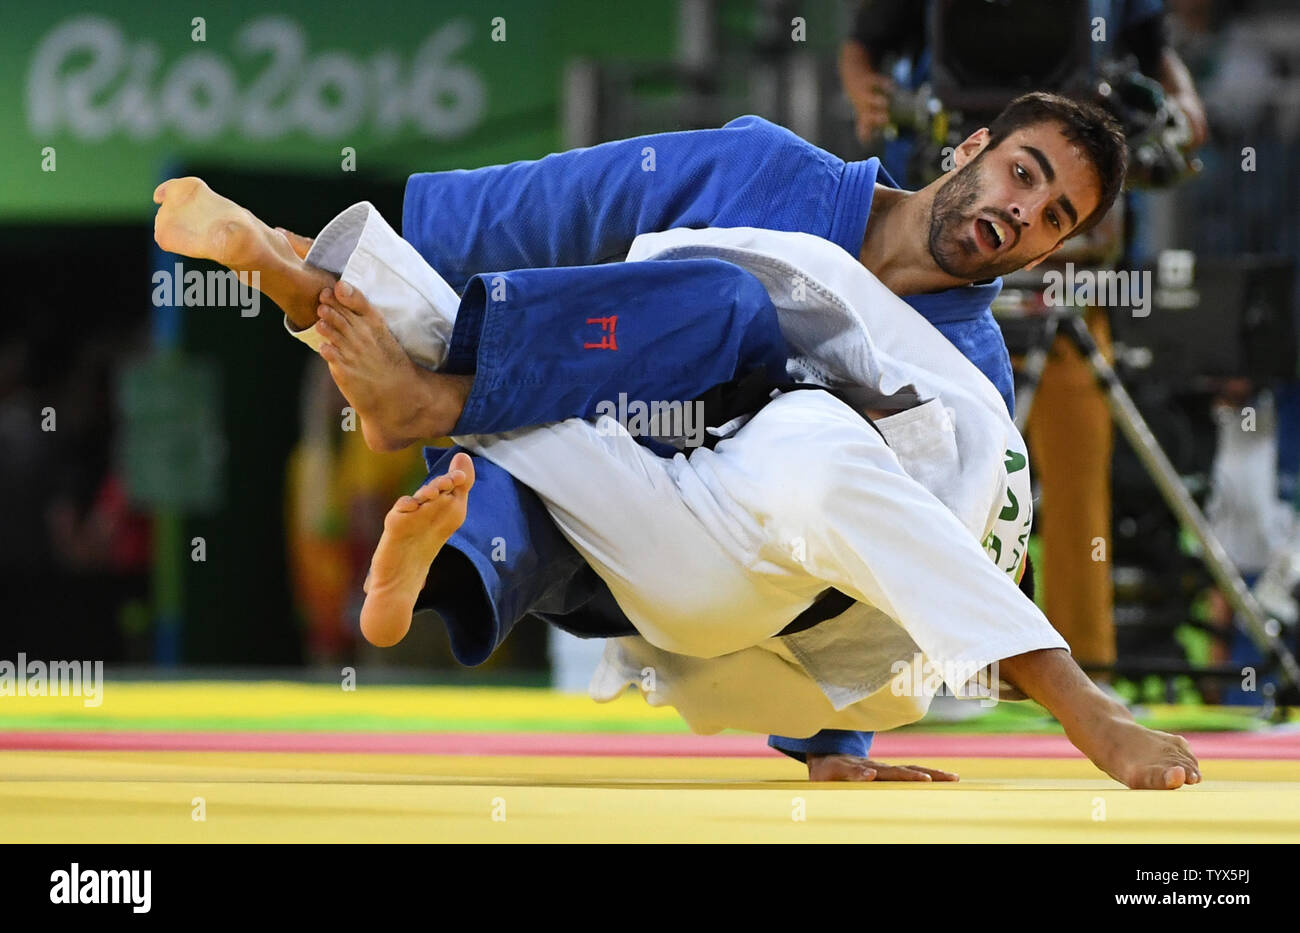 Antoine Bouchard of Canada tangles with Tumurkhuleg Davaadorj of Mongolia in 66KG Judo at the 2016 Rio Summer Olympics in Rio de Janeiro, Brazil, on August 7, 2016. Bouchard won the match.  Photo by Terry Schmitt/UPI Stock Photo